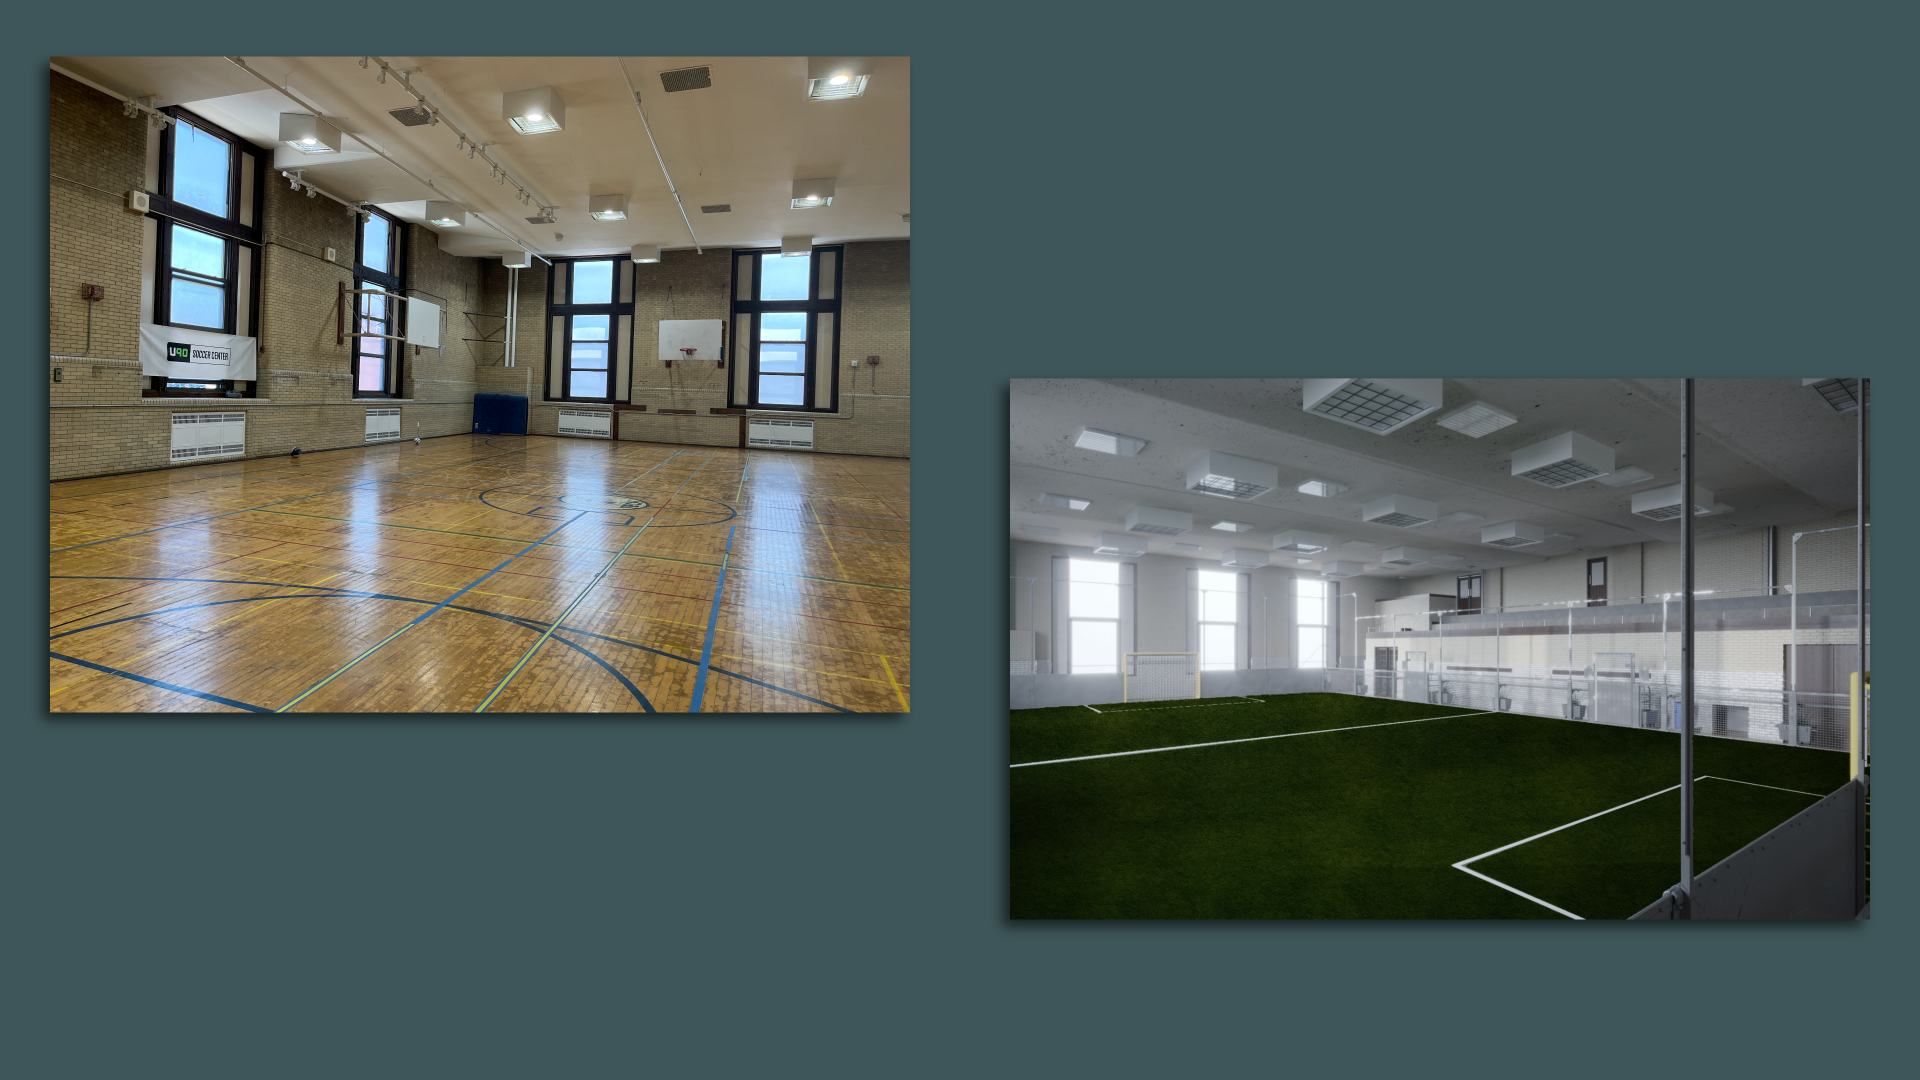 Side-by-side images of an indoor gym that will be transformed into a futsal court in South Philadelphia.